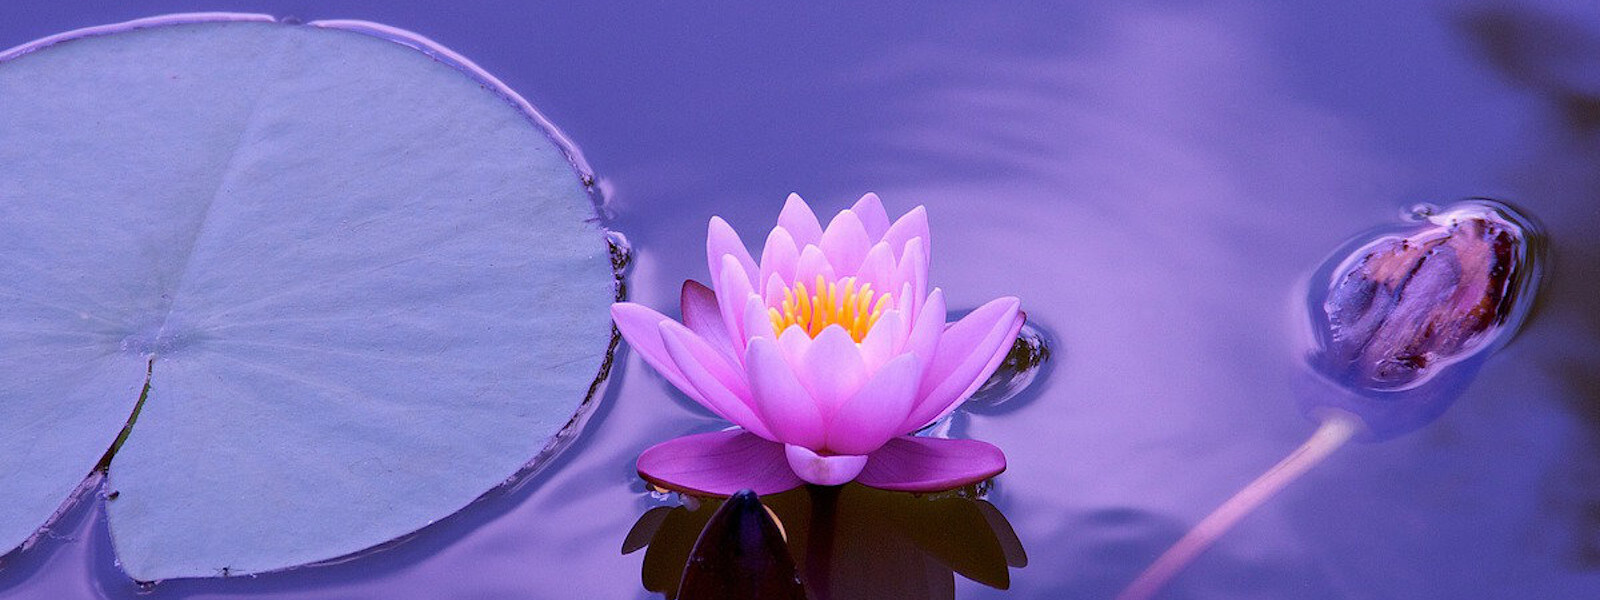 A purple lotus flower swimming on a pond.